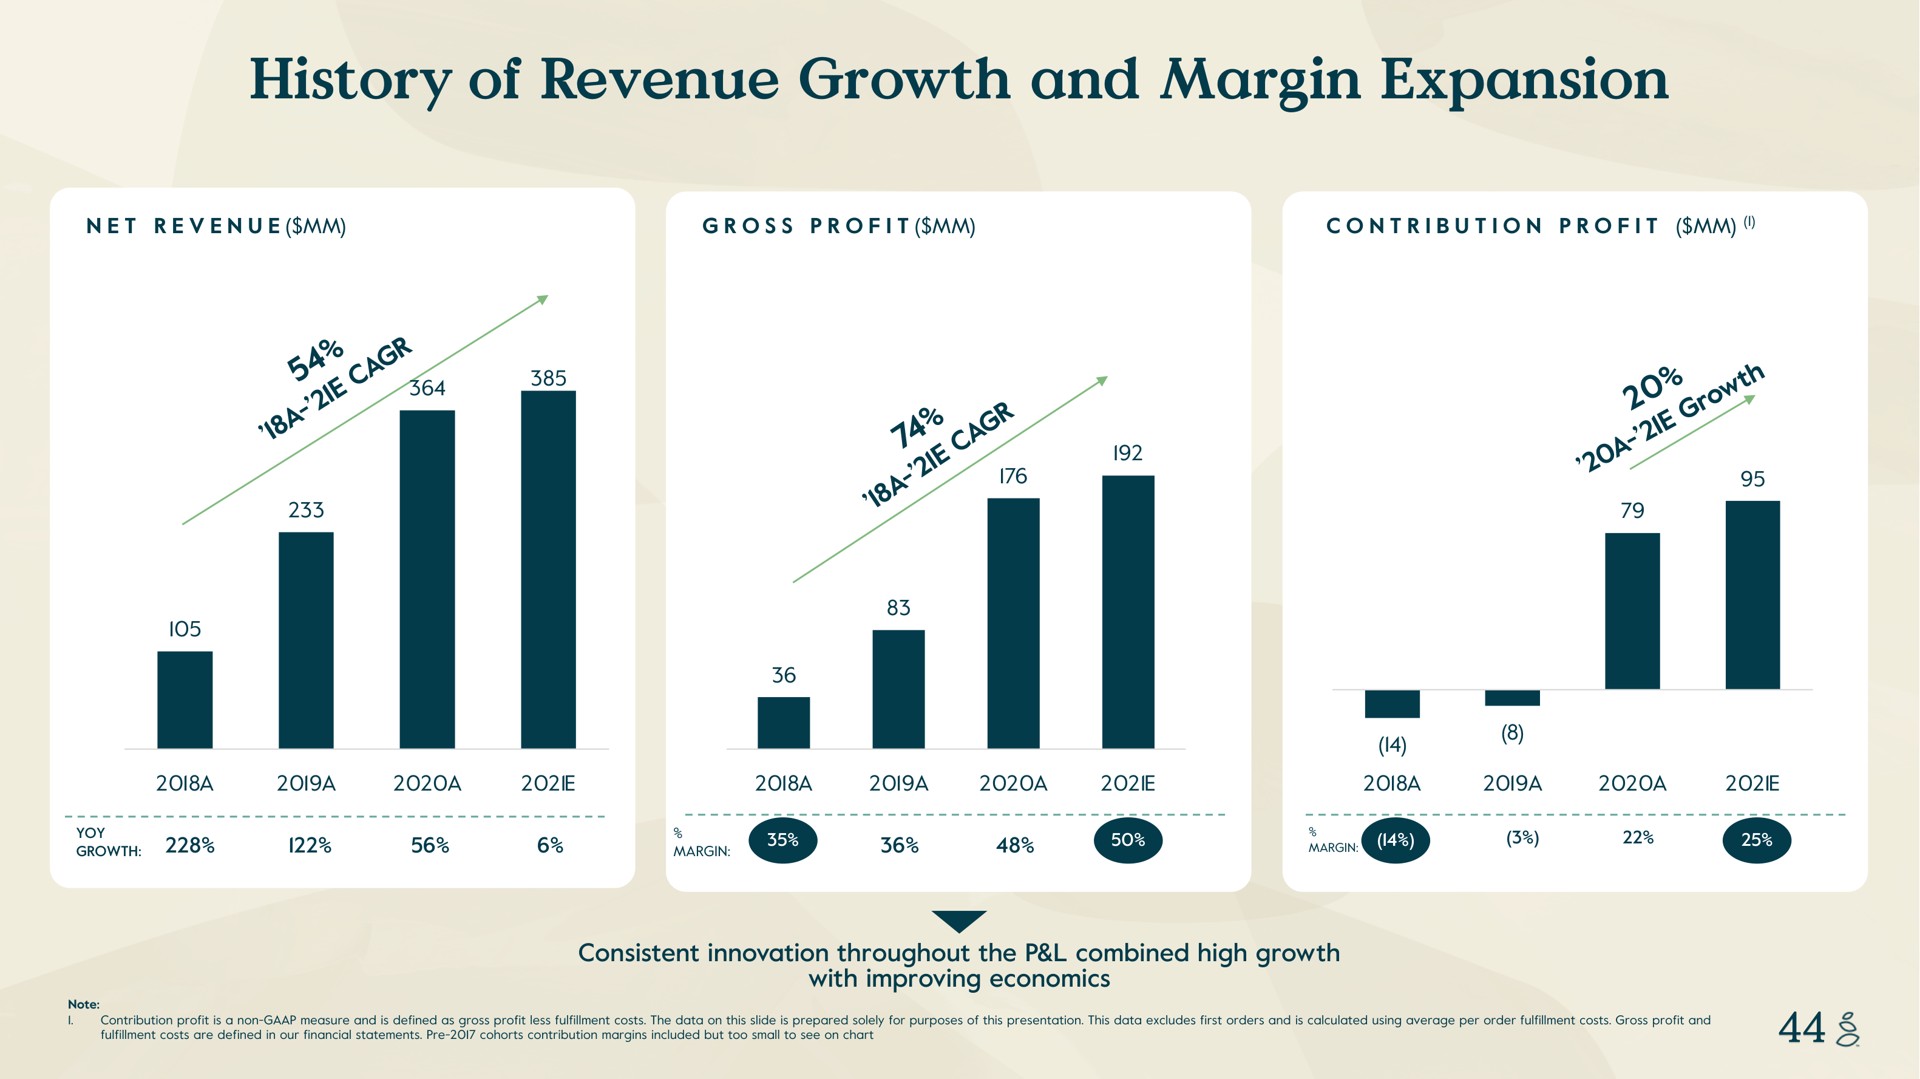 history of revenue growth and margin expansion net gross profit contribution profit a a a yoy yoy a a i a a a a nice note i contribution profit is a non measure is defined as gross profit less fulfillment costs the data on this slide is prepared solely for purposes this presentation this data excludes first orders is calculated using average per order fulfillment costs gross profit fulfillment costs are defined in our financial statements i cohorts contribution margins included but too small to see on chart consistent innovation throughout the combined high with improving economics | Grove